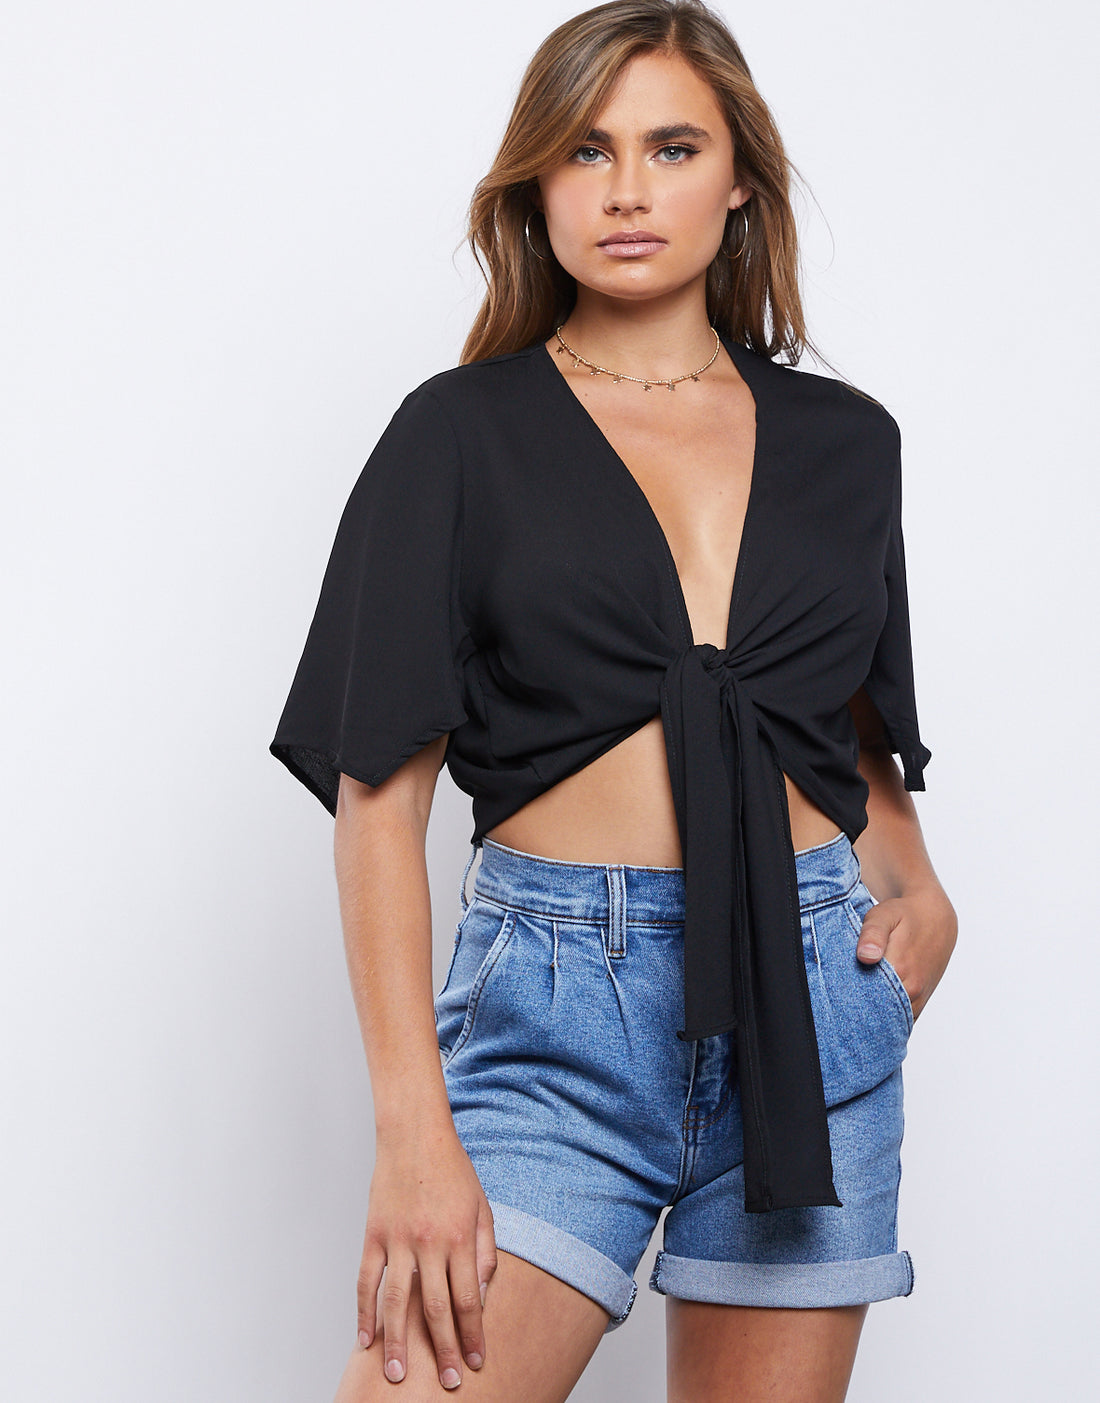 San Tropez Tie Front Top Tops Black Small -2020AVE